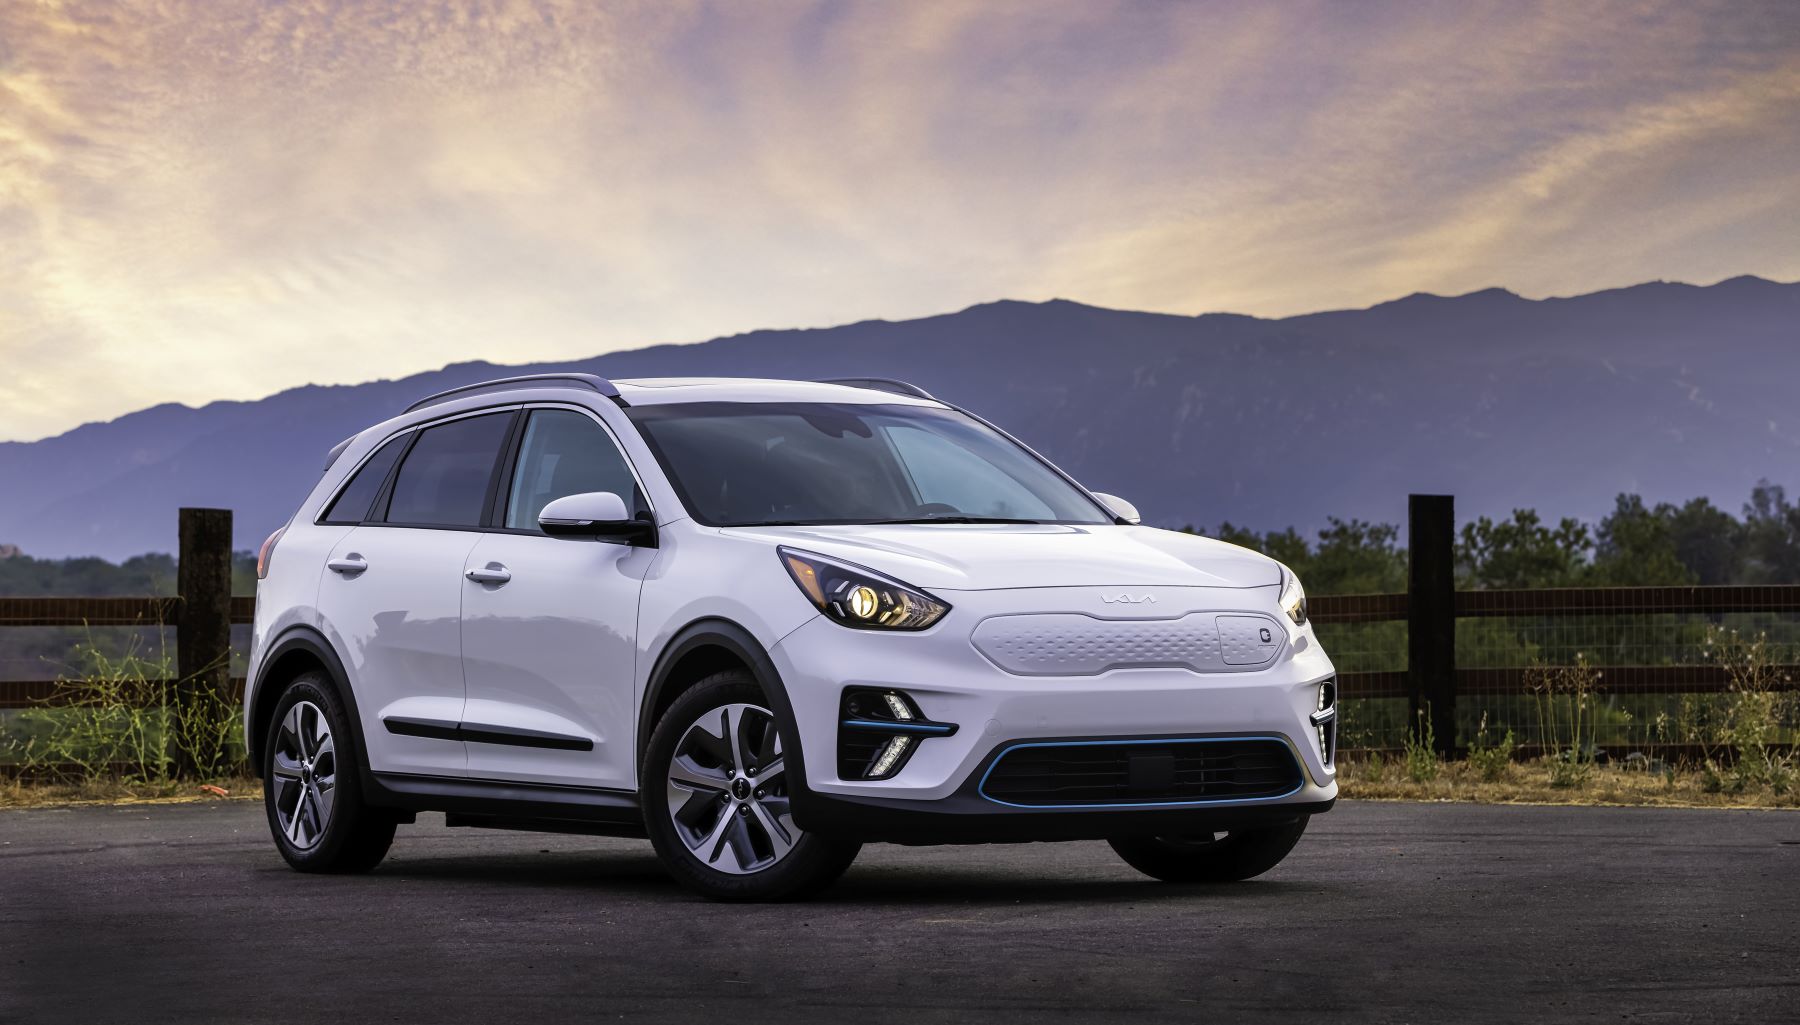 2022 Kia Niro EV in whit paint color parked by a barb wire wooden fence at sunset